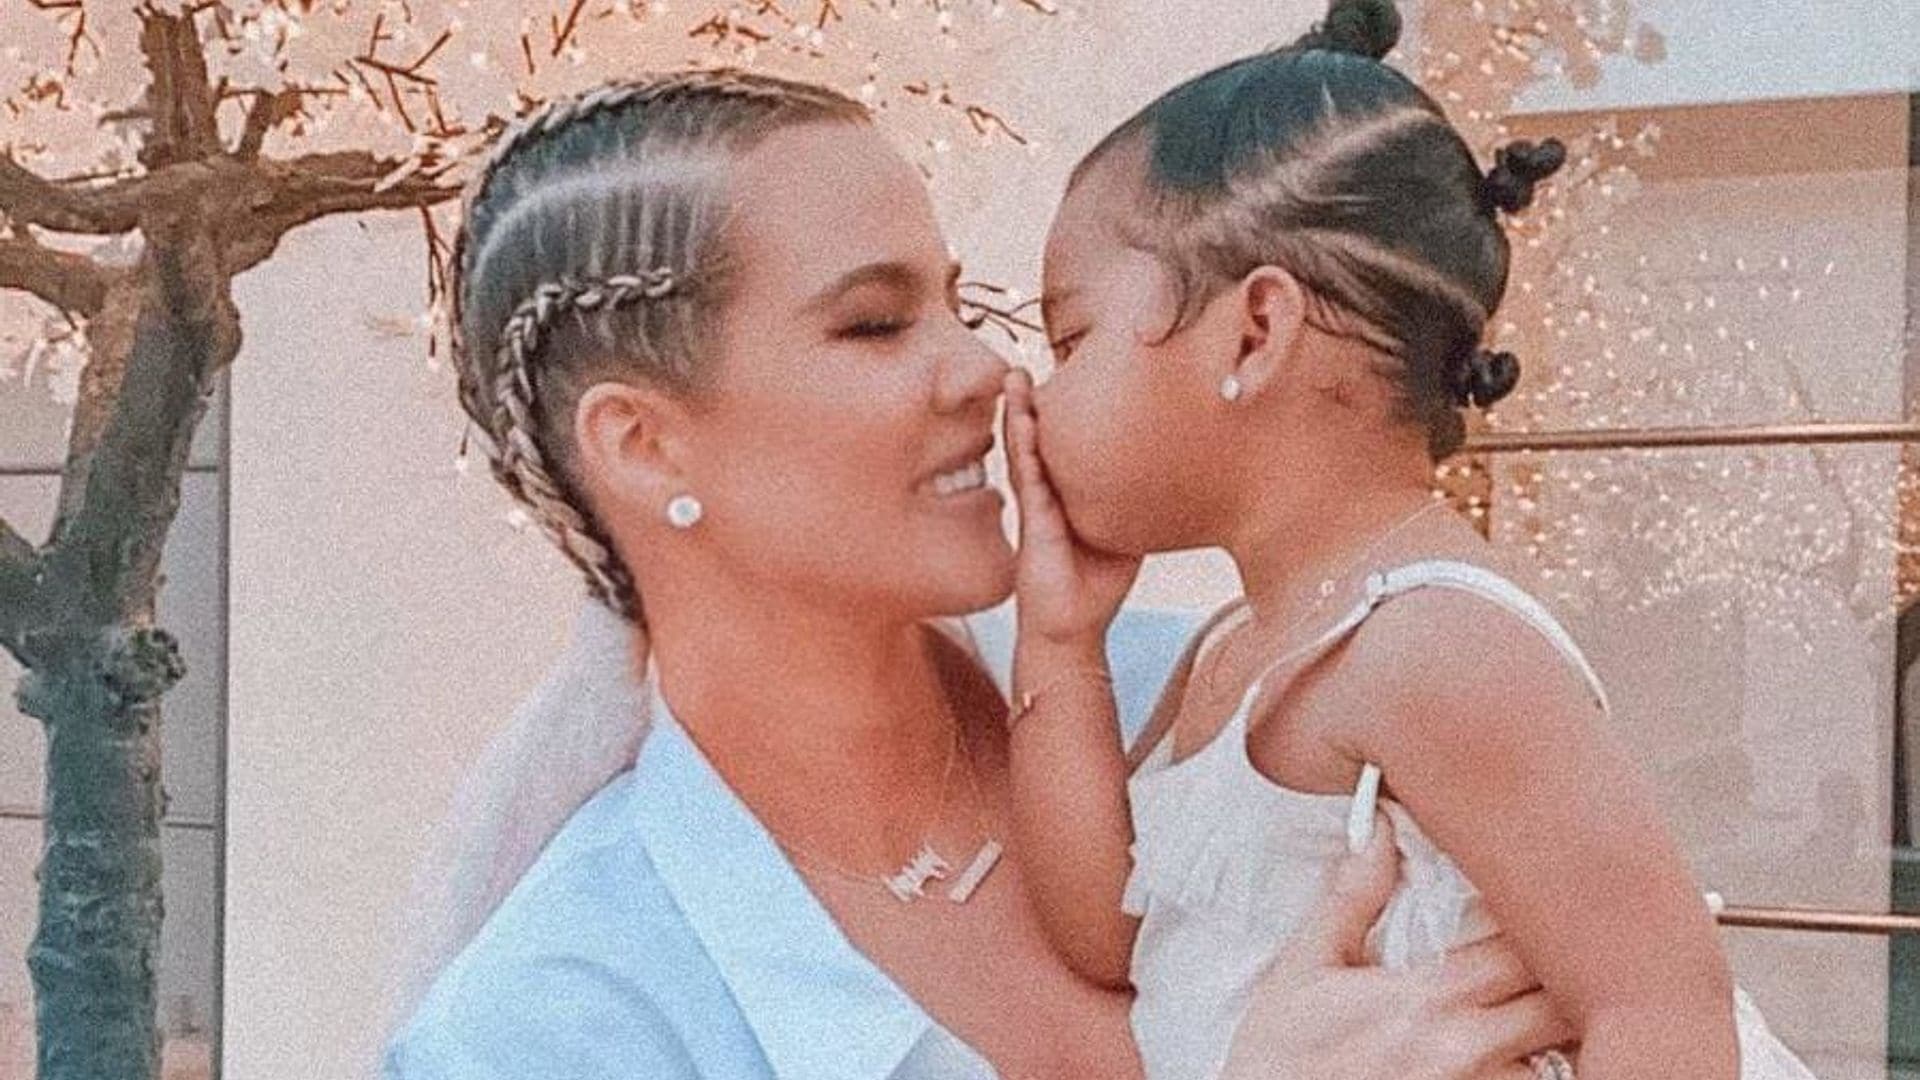 Khloe Kardashian’s daughter True has a life-size dollhouse and we’re blown away!